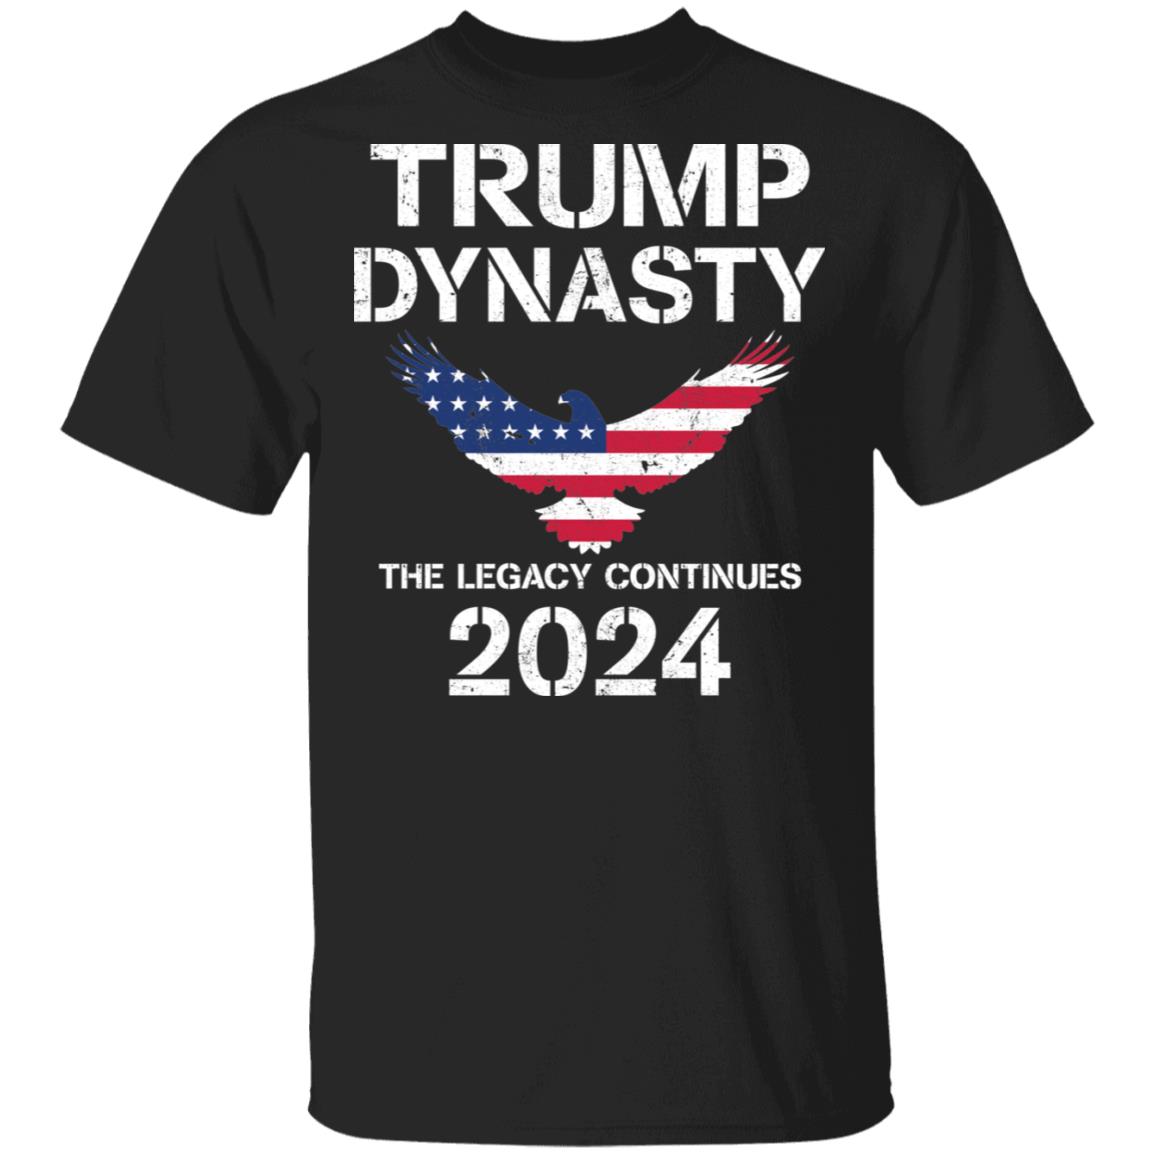 Trump Dynasty The Legacy Continues 2024 t-shirt and hoodie ...